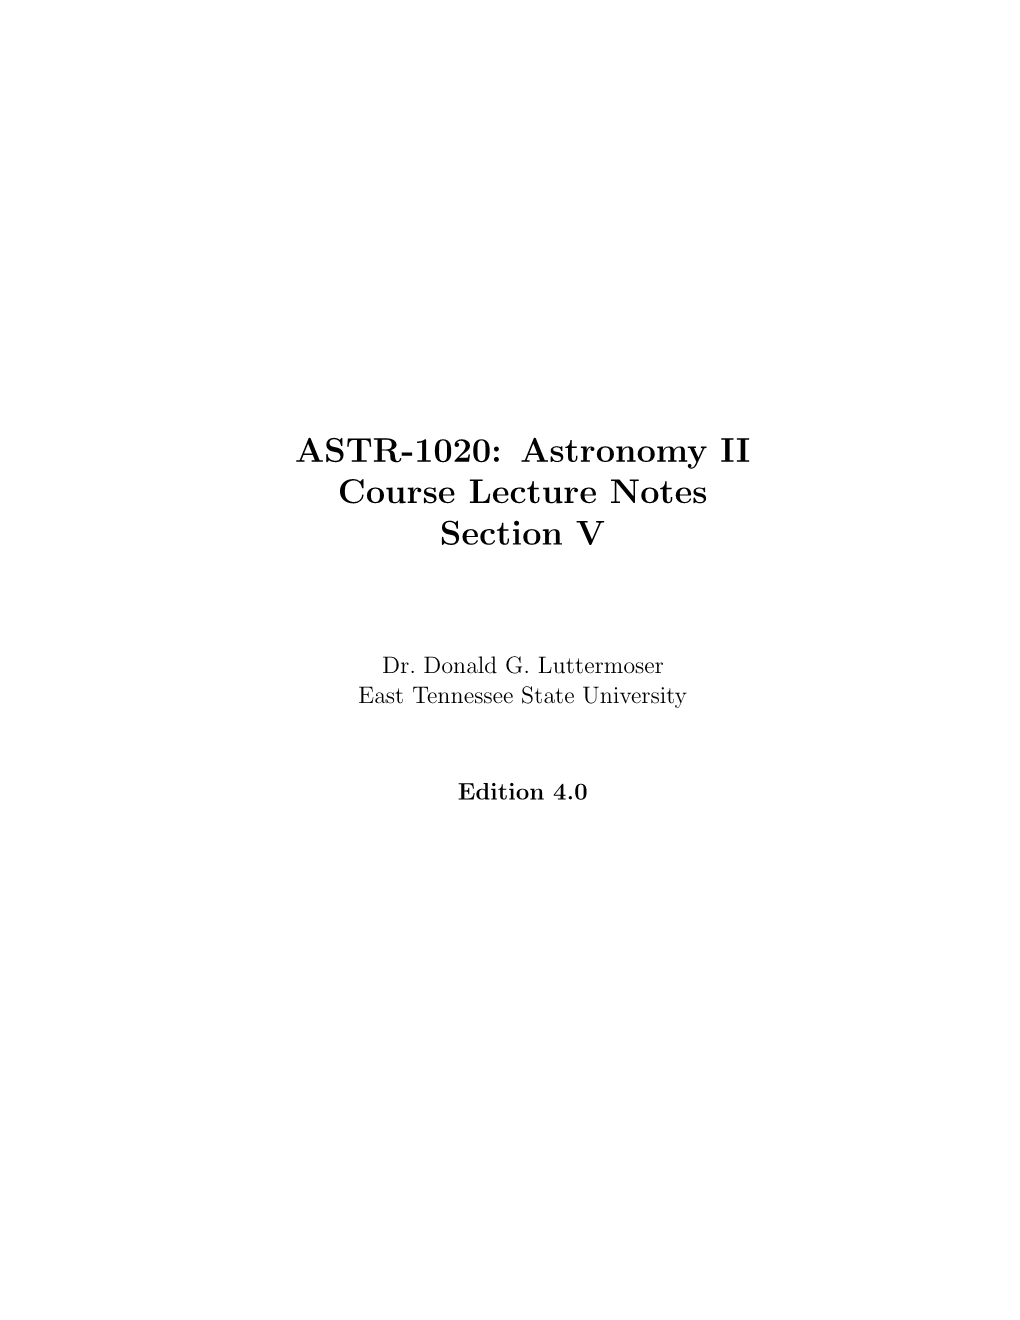 ASTR-1020: Astronomy II Course Lecture Notes Section V